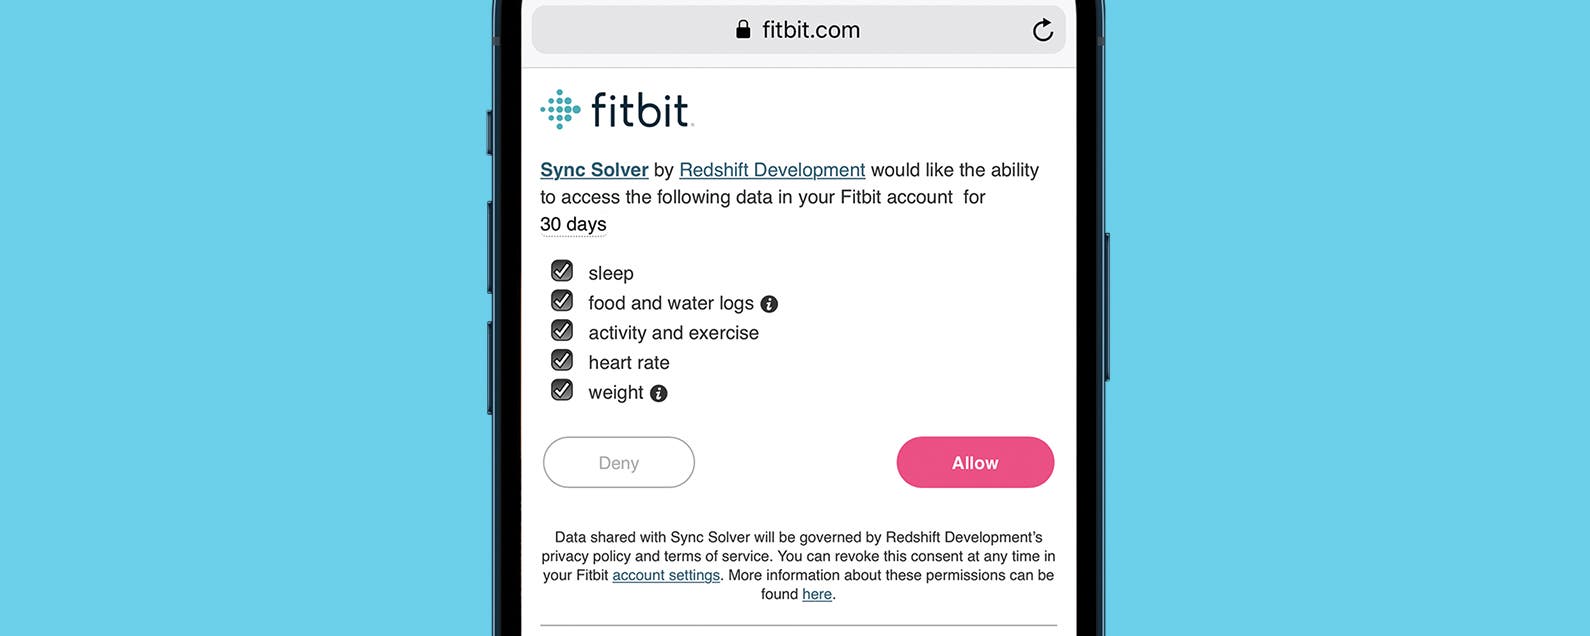 enhed nikotin salgsplan How to Connect Fitbit to Apple Health—Garmin, & Withings Too—in iOS 16